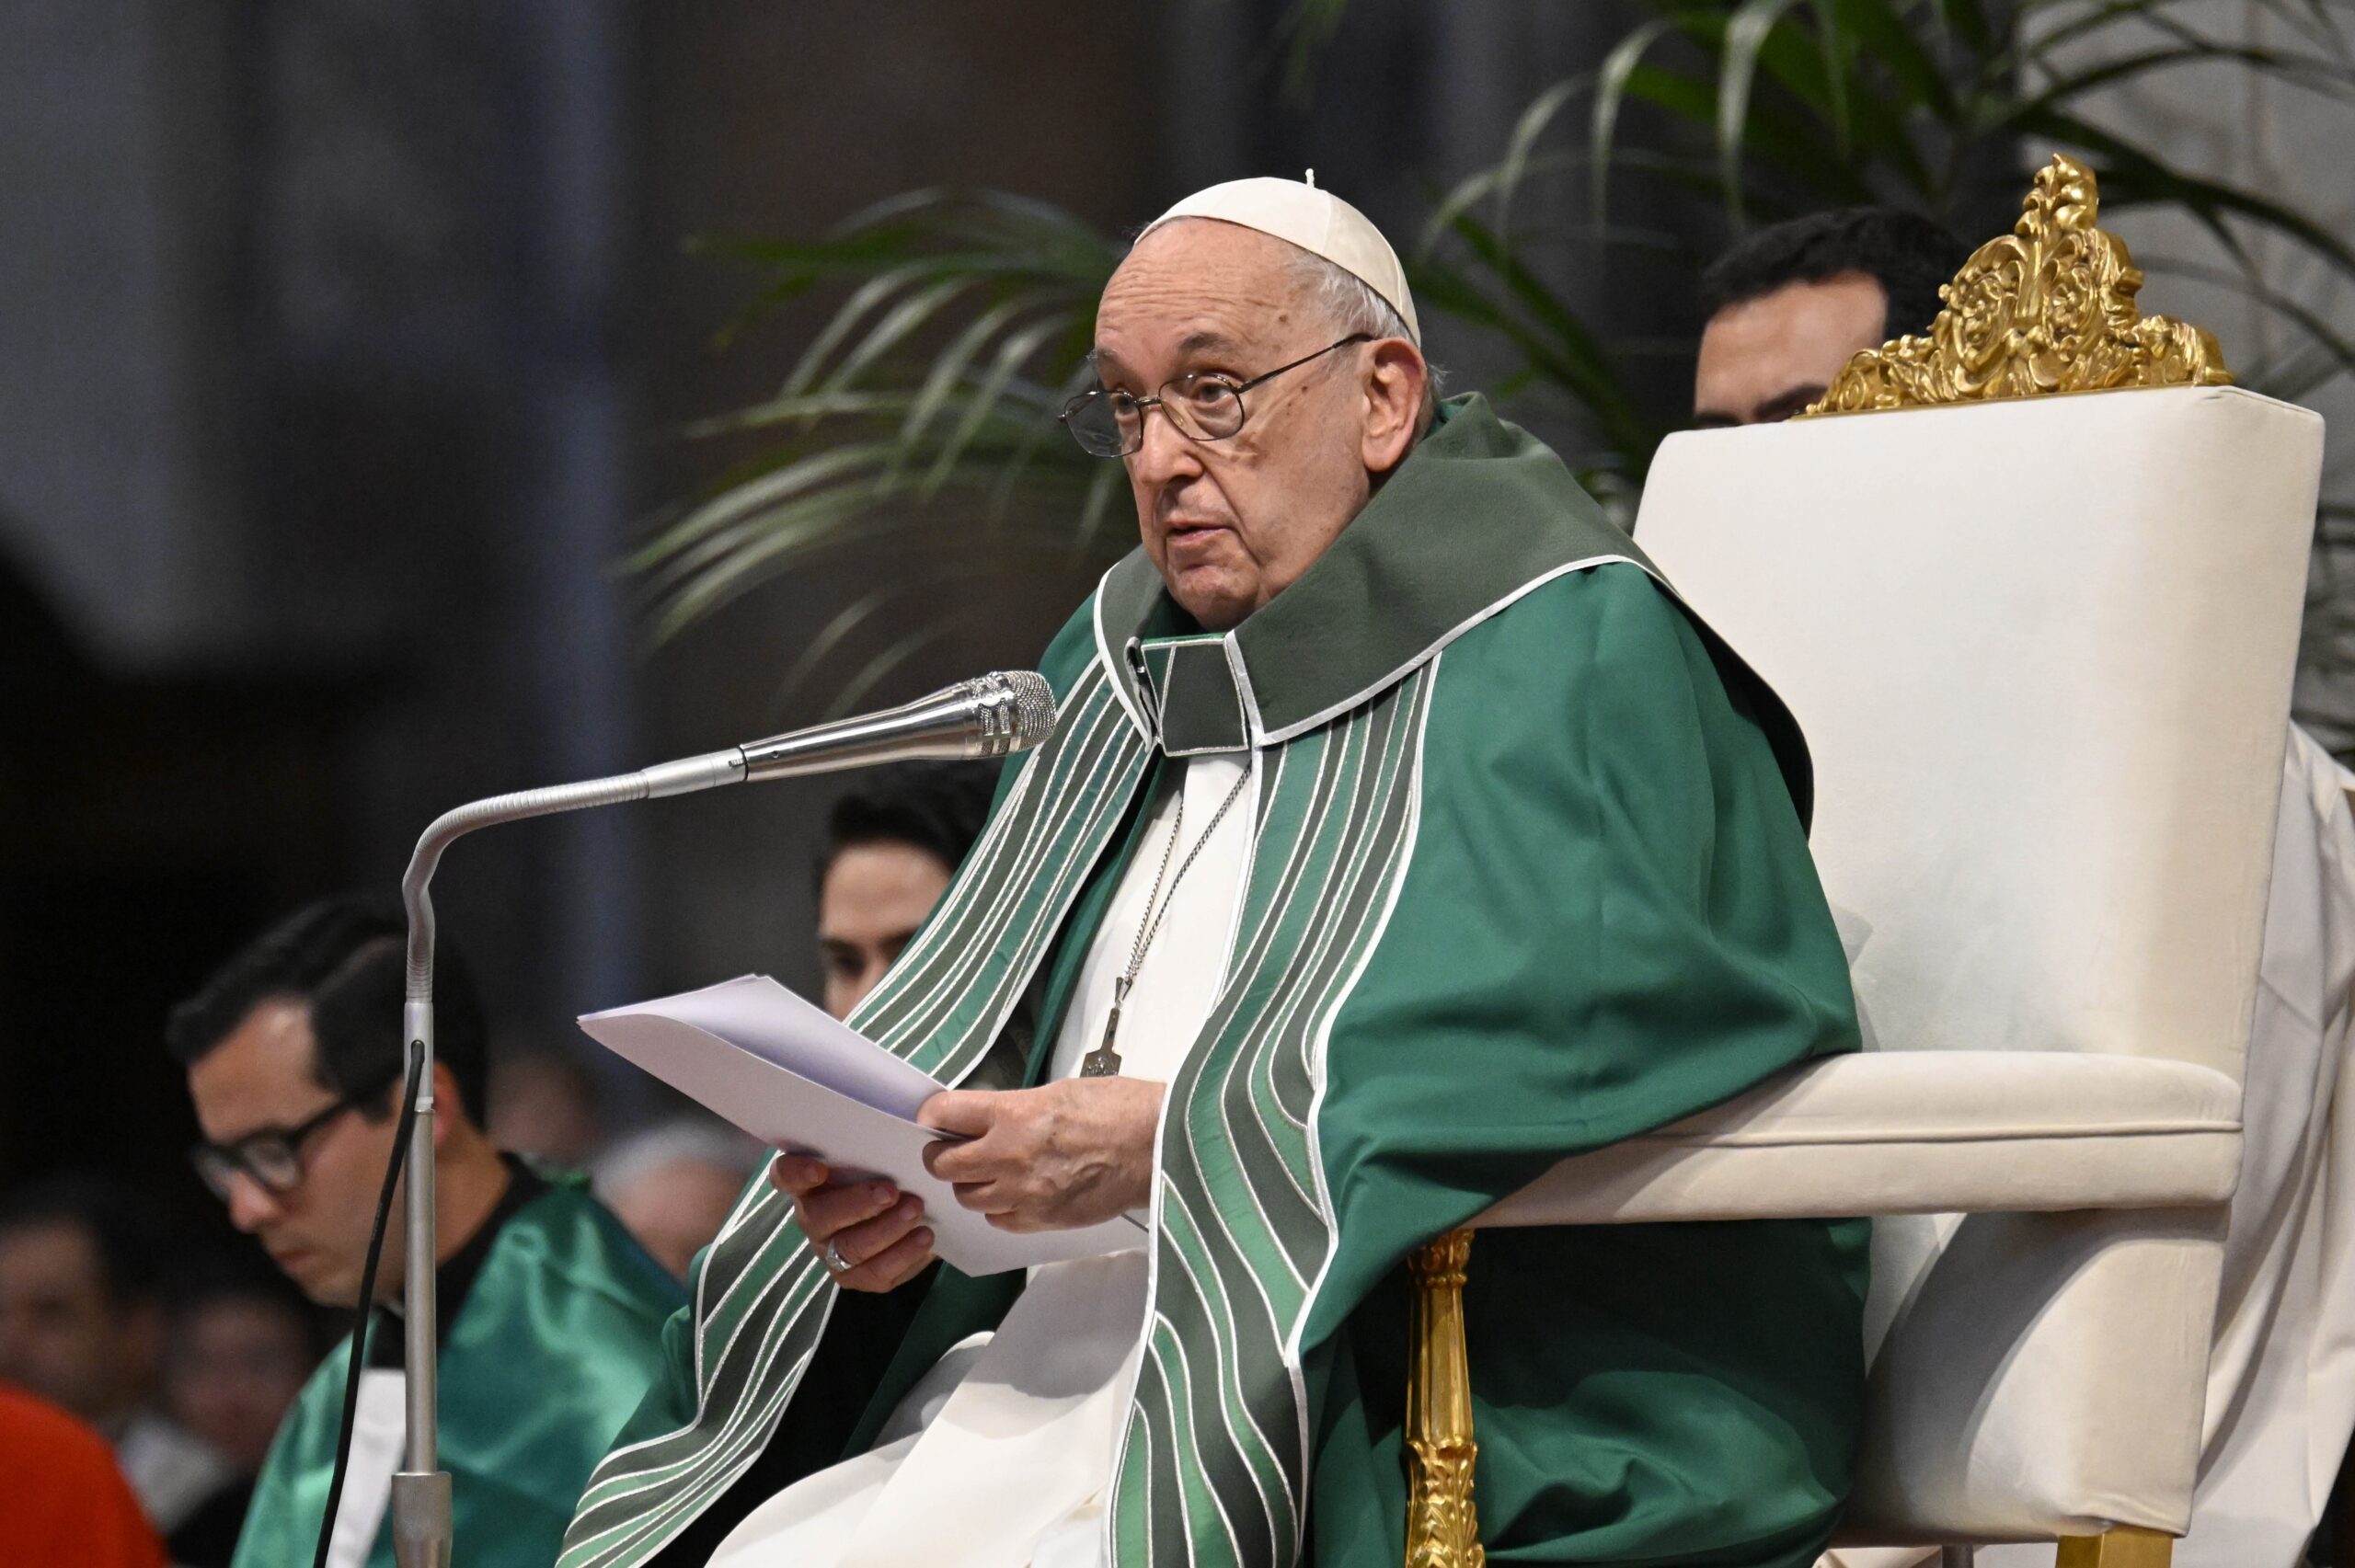 Pope Francis gives the homily at Mass in St. Peter's Basilica at the Vatican Oct. 29, 2023, marking the conclusion of the first session of the Synod of Bishops on synodality. (CNS photo/Vatican Media)